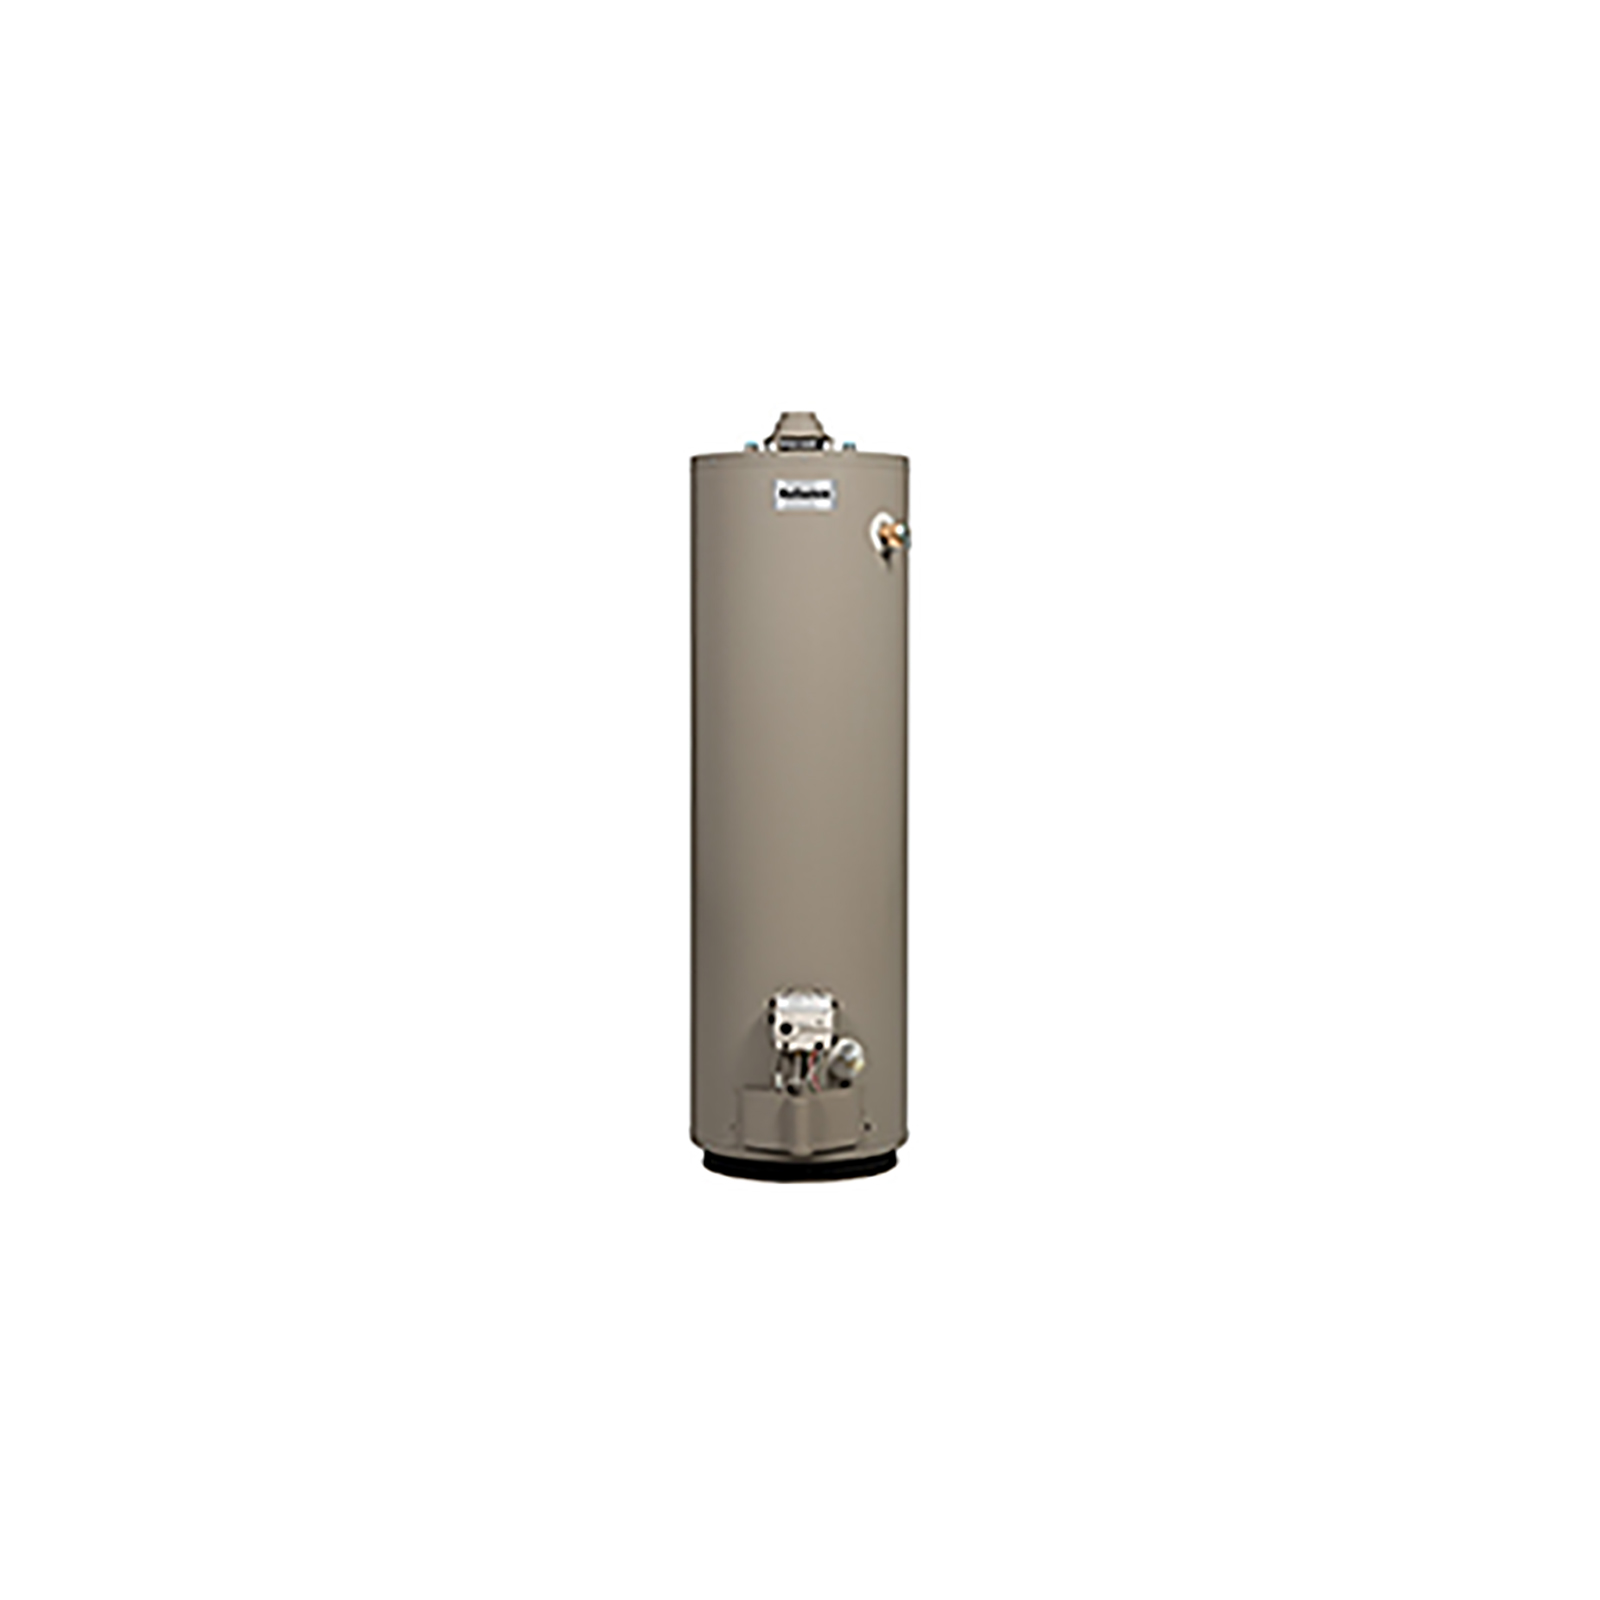 Reliance Water Heaters 6-40-NBCS  40gal Natural Gas Water Heater